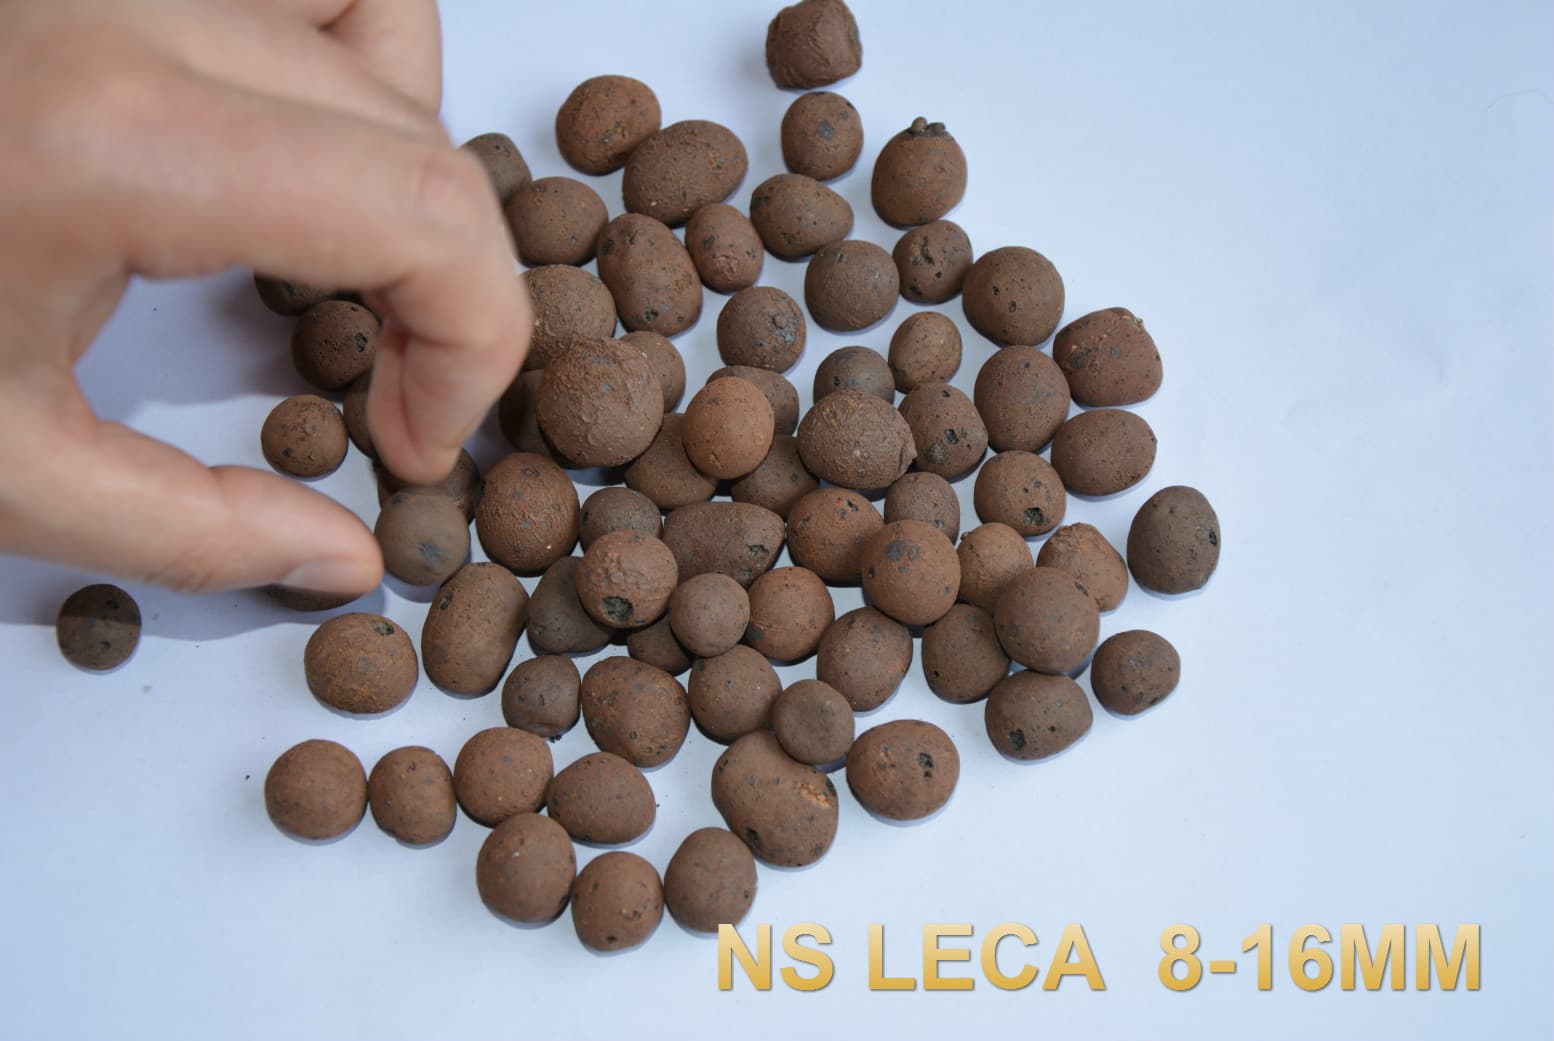 LECA _Expanded Clay 8_16mm for Hydroponics